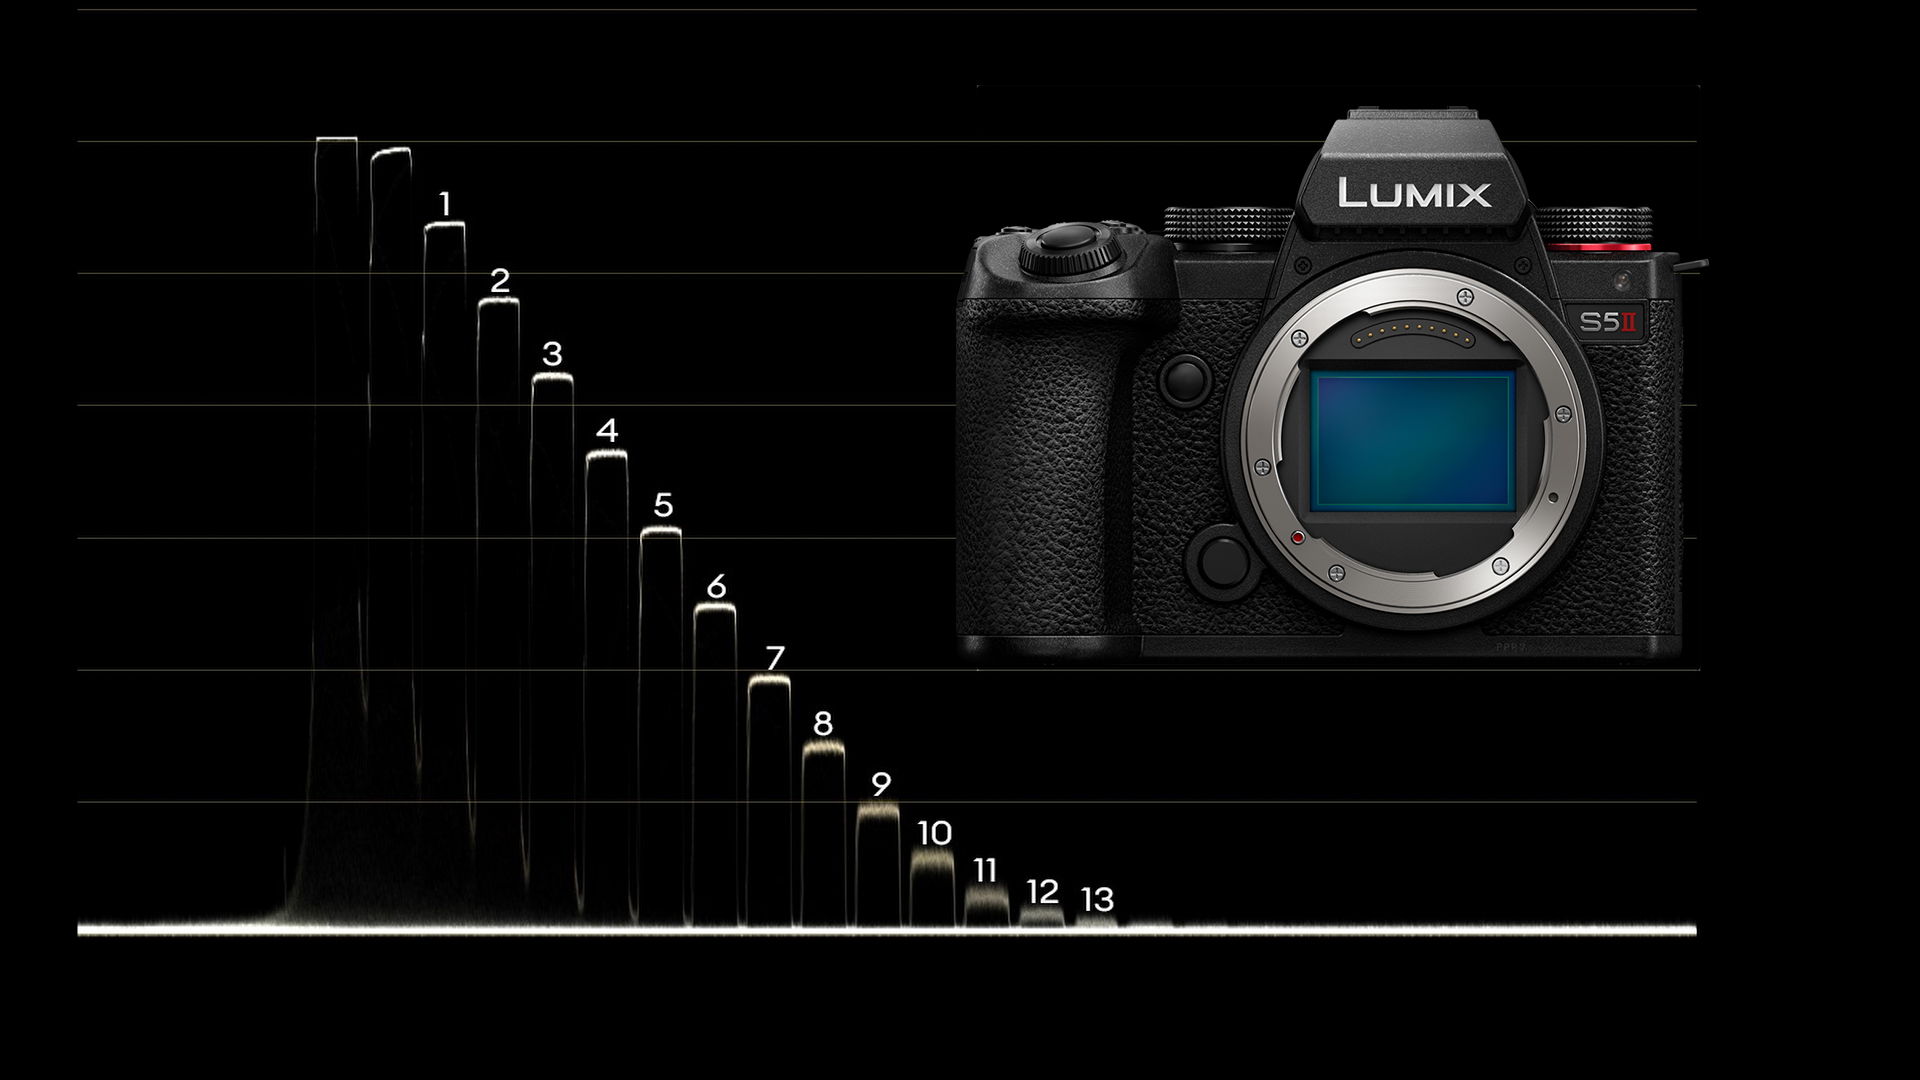 This $300 Panasonic Lumix S5 II saving could be one of the last